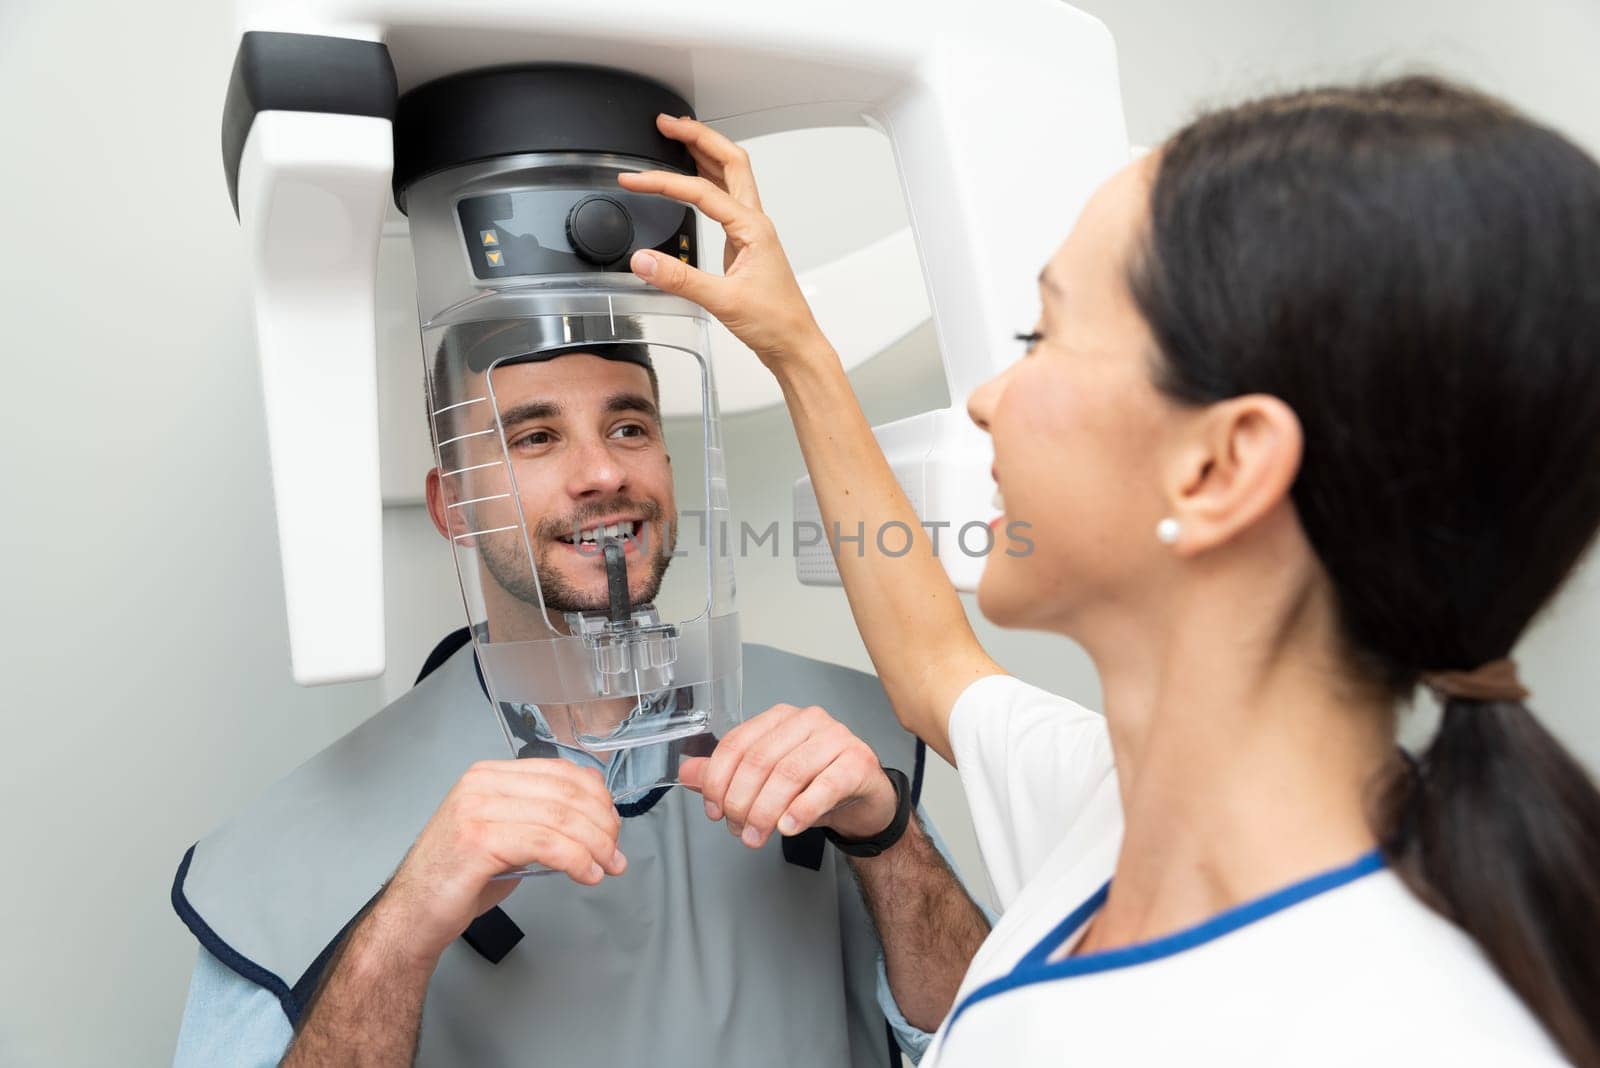 Patient standing in x-ray machine at dental clinic by simpson33